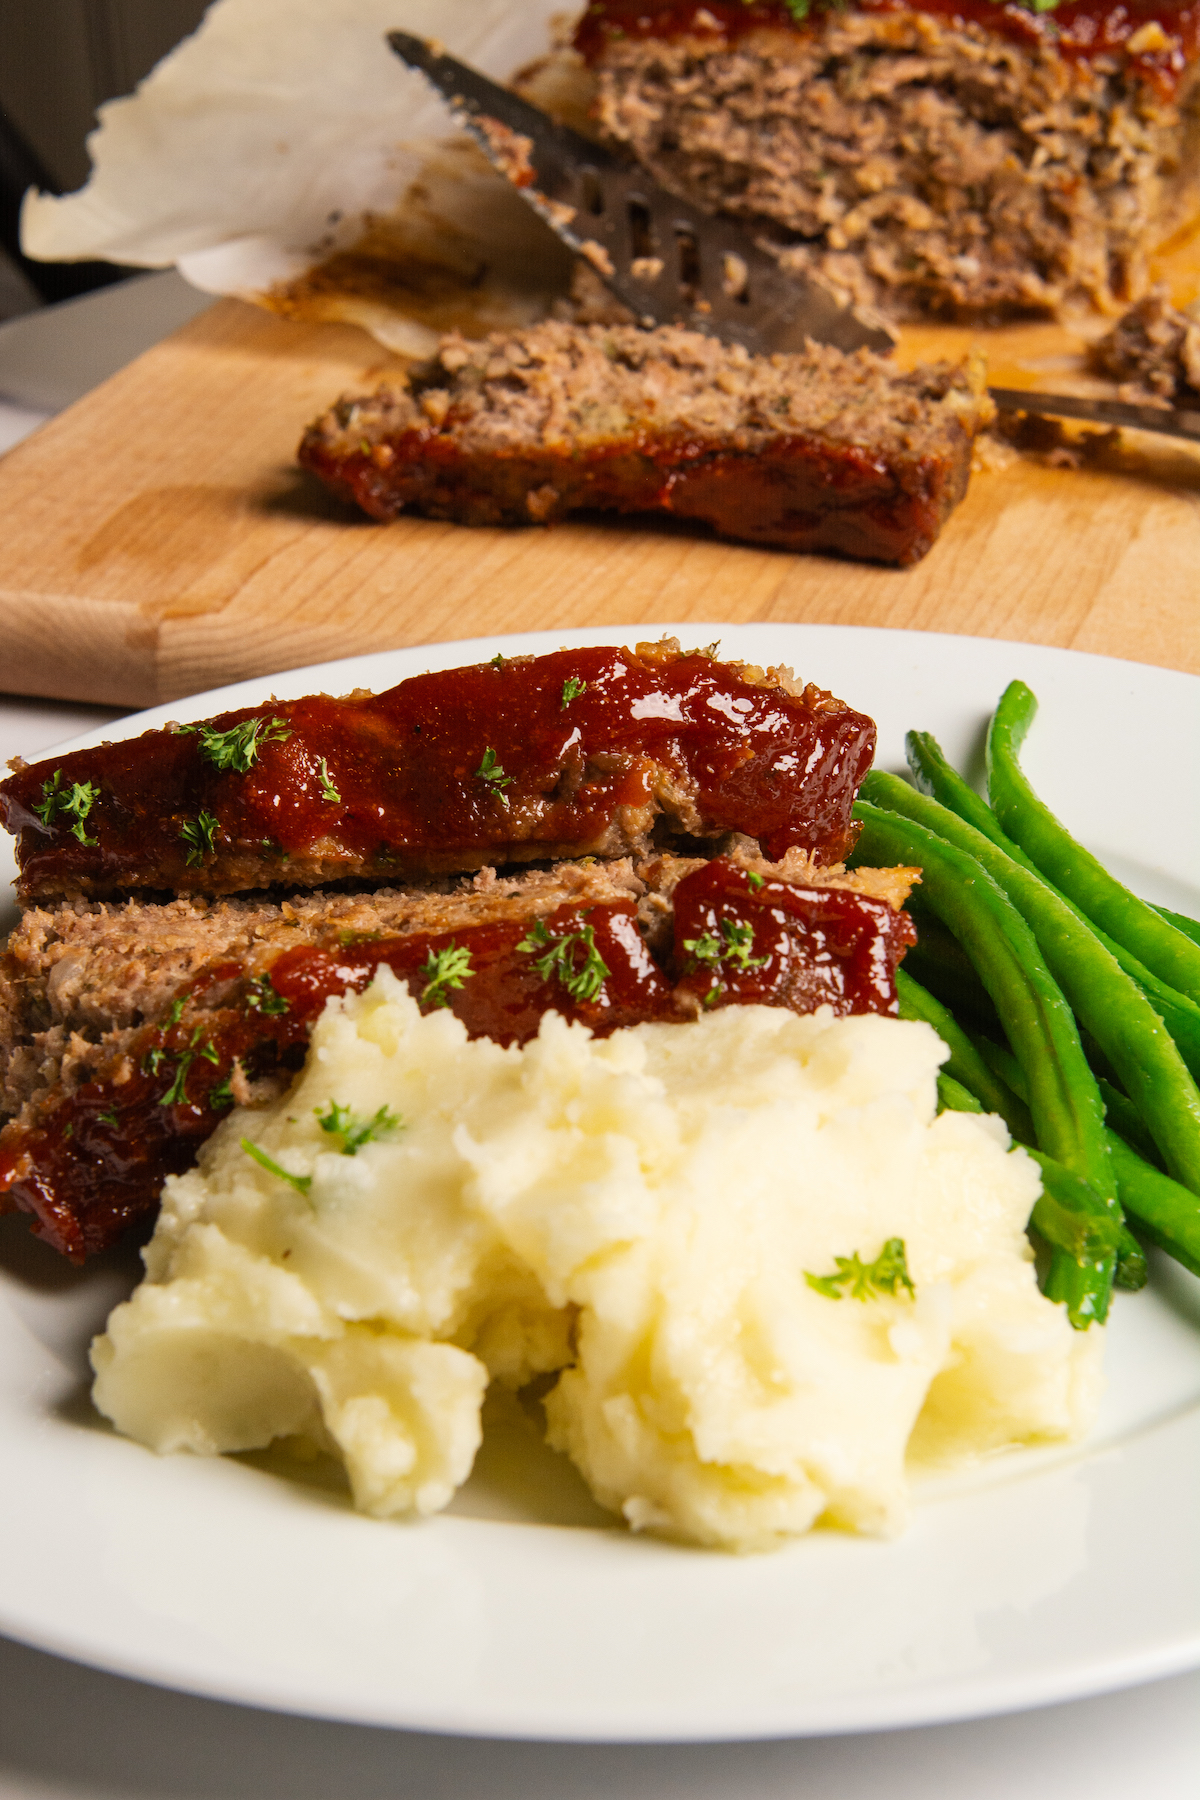 A plate with meatloaf and a sweet glaze, with green beans and mashed potatoes